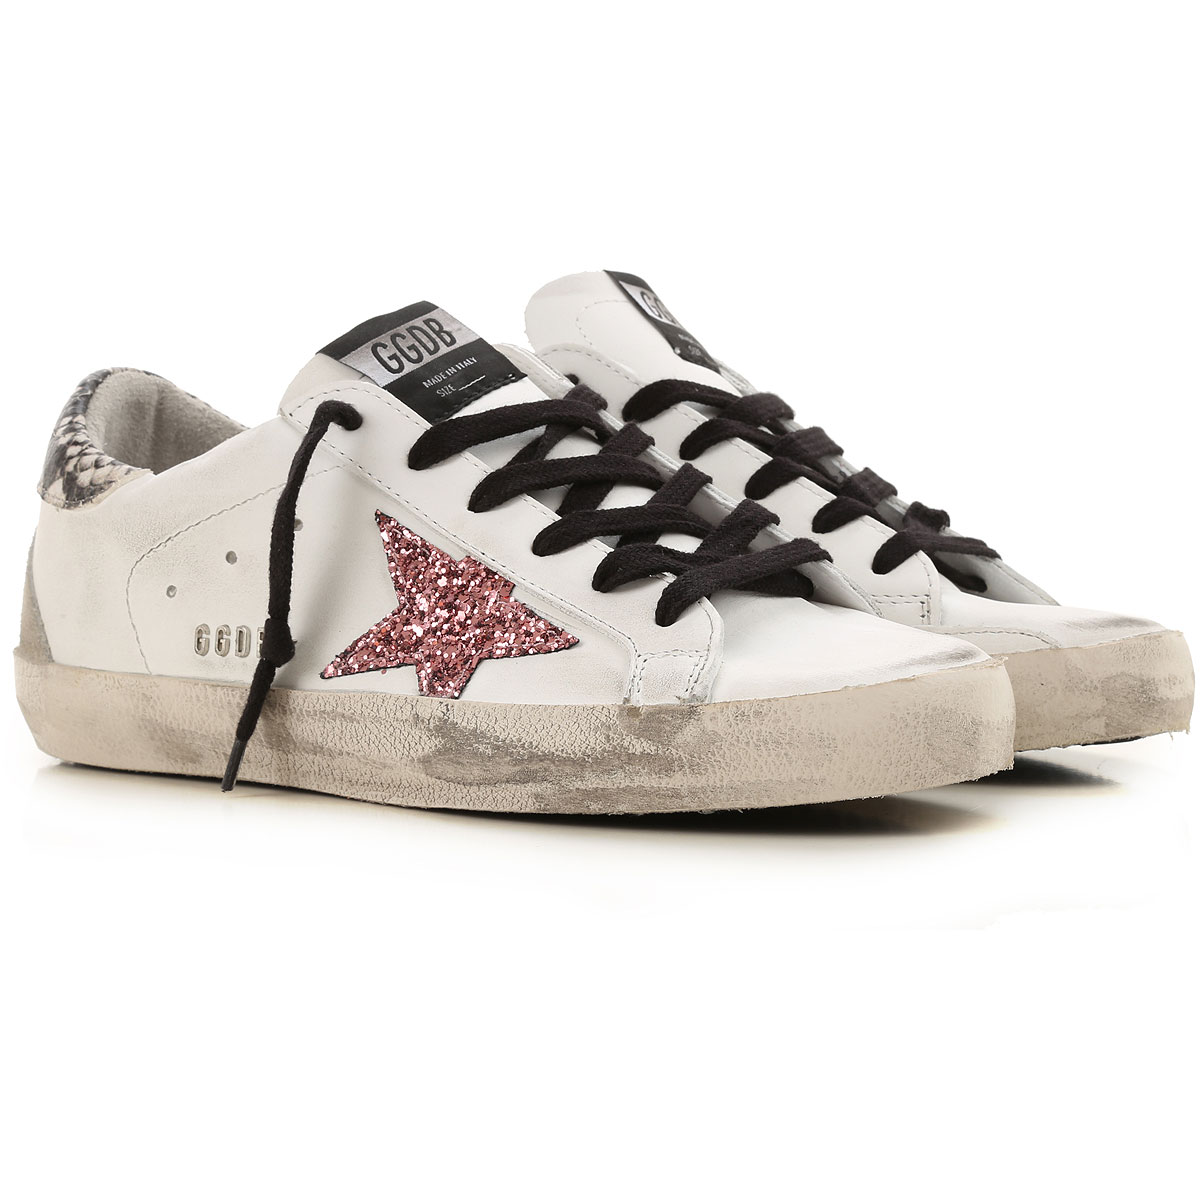 Womens Shoes Golden Goose, Style code g35ws590r56whiteleathersnake